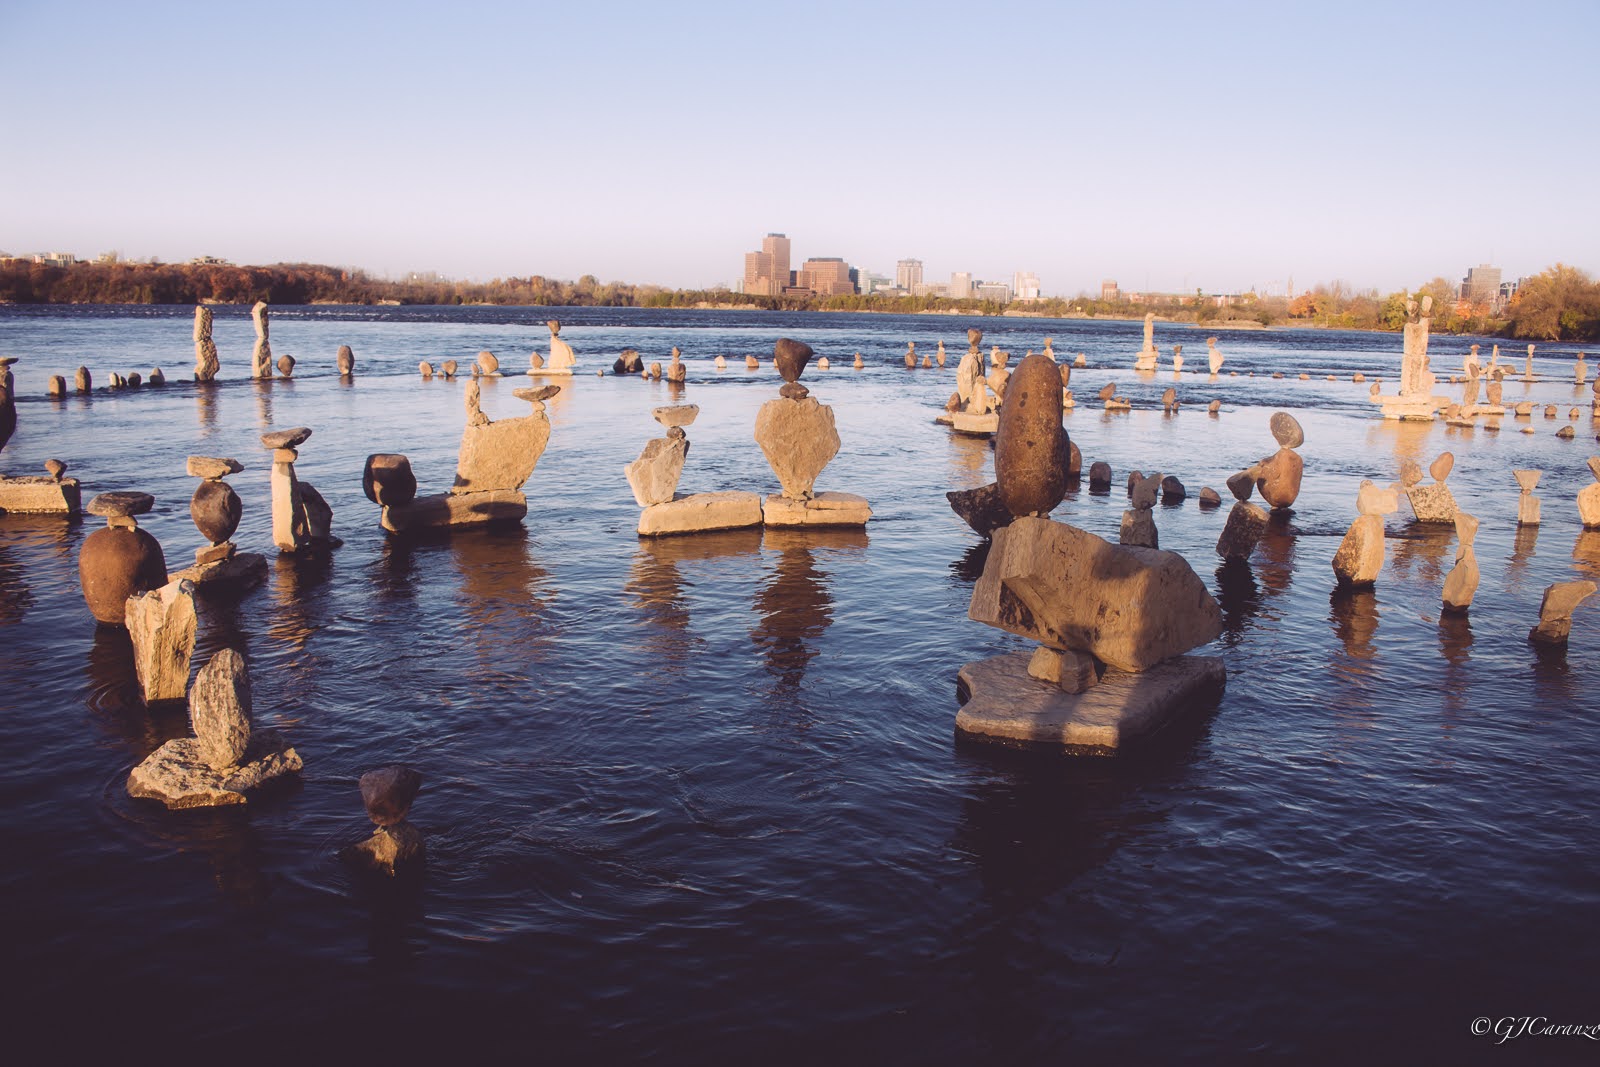 Ottawa, Ontario Things to Do: See the Rock Sculptures At Remic Rapids Park